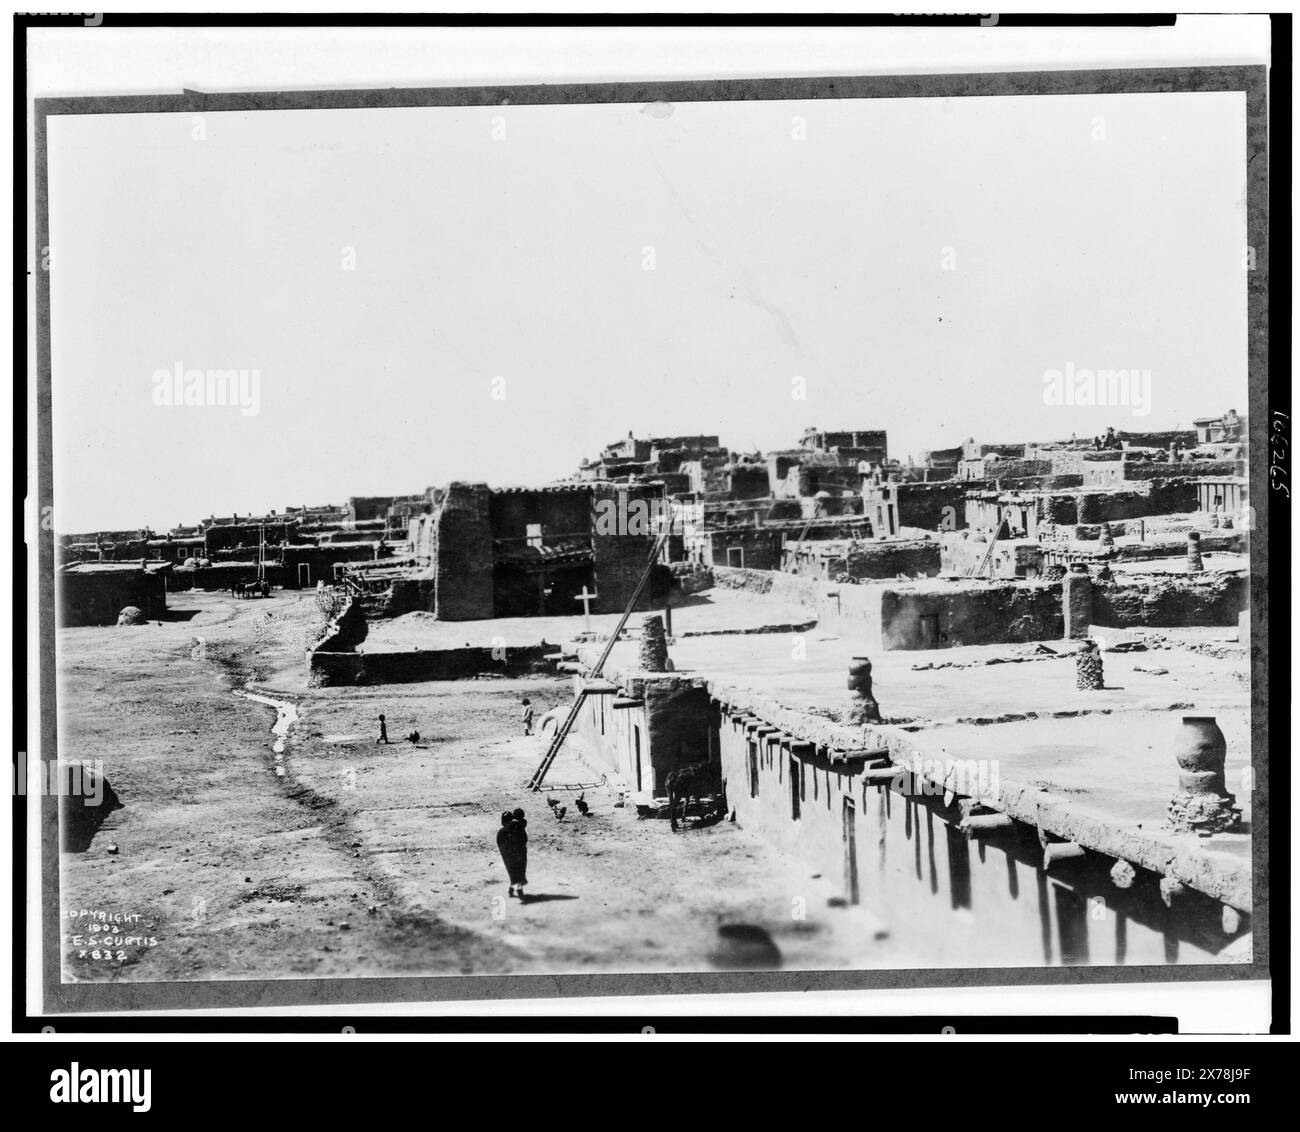 Zuni Pueblo, New Mexico, Edward S. Curtis Collection., Curtis no. 832., Published in: The North American Indian / Edward S. Curtis. [Seattle, Wash.] : Edward S. Curtis, 1907-30 suppl., v. 17, p. 84.. Indians of North America, New Mexico, Structures, 1920-1930. , Zuni Indians, Structures, 1920-1930. , Pueblos, New Mexico, 1920-1930. Stock Photo